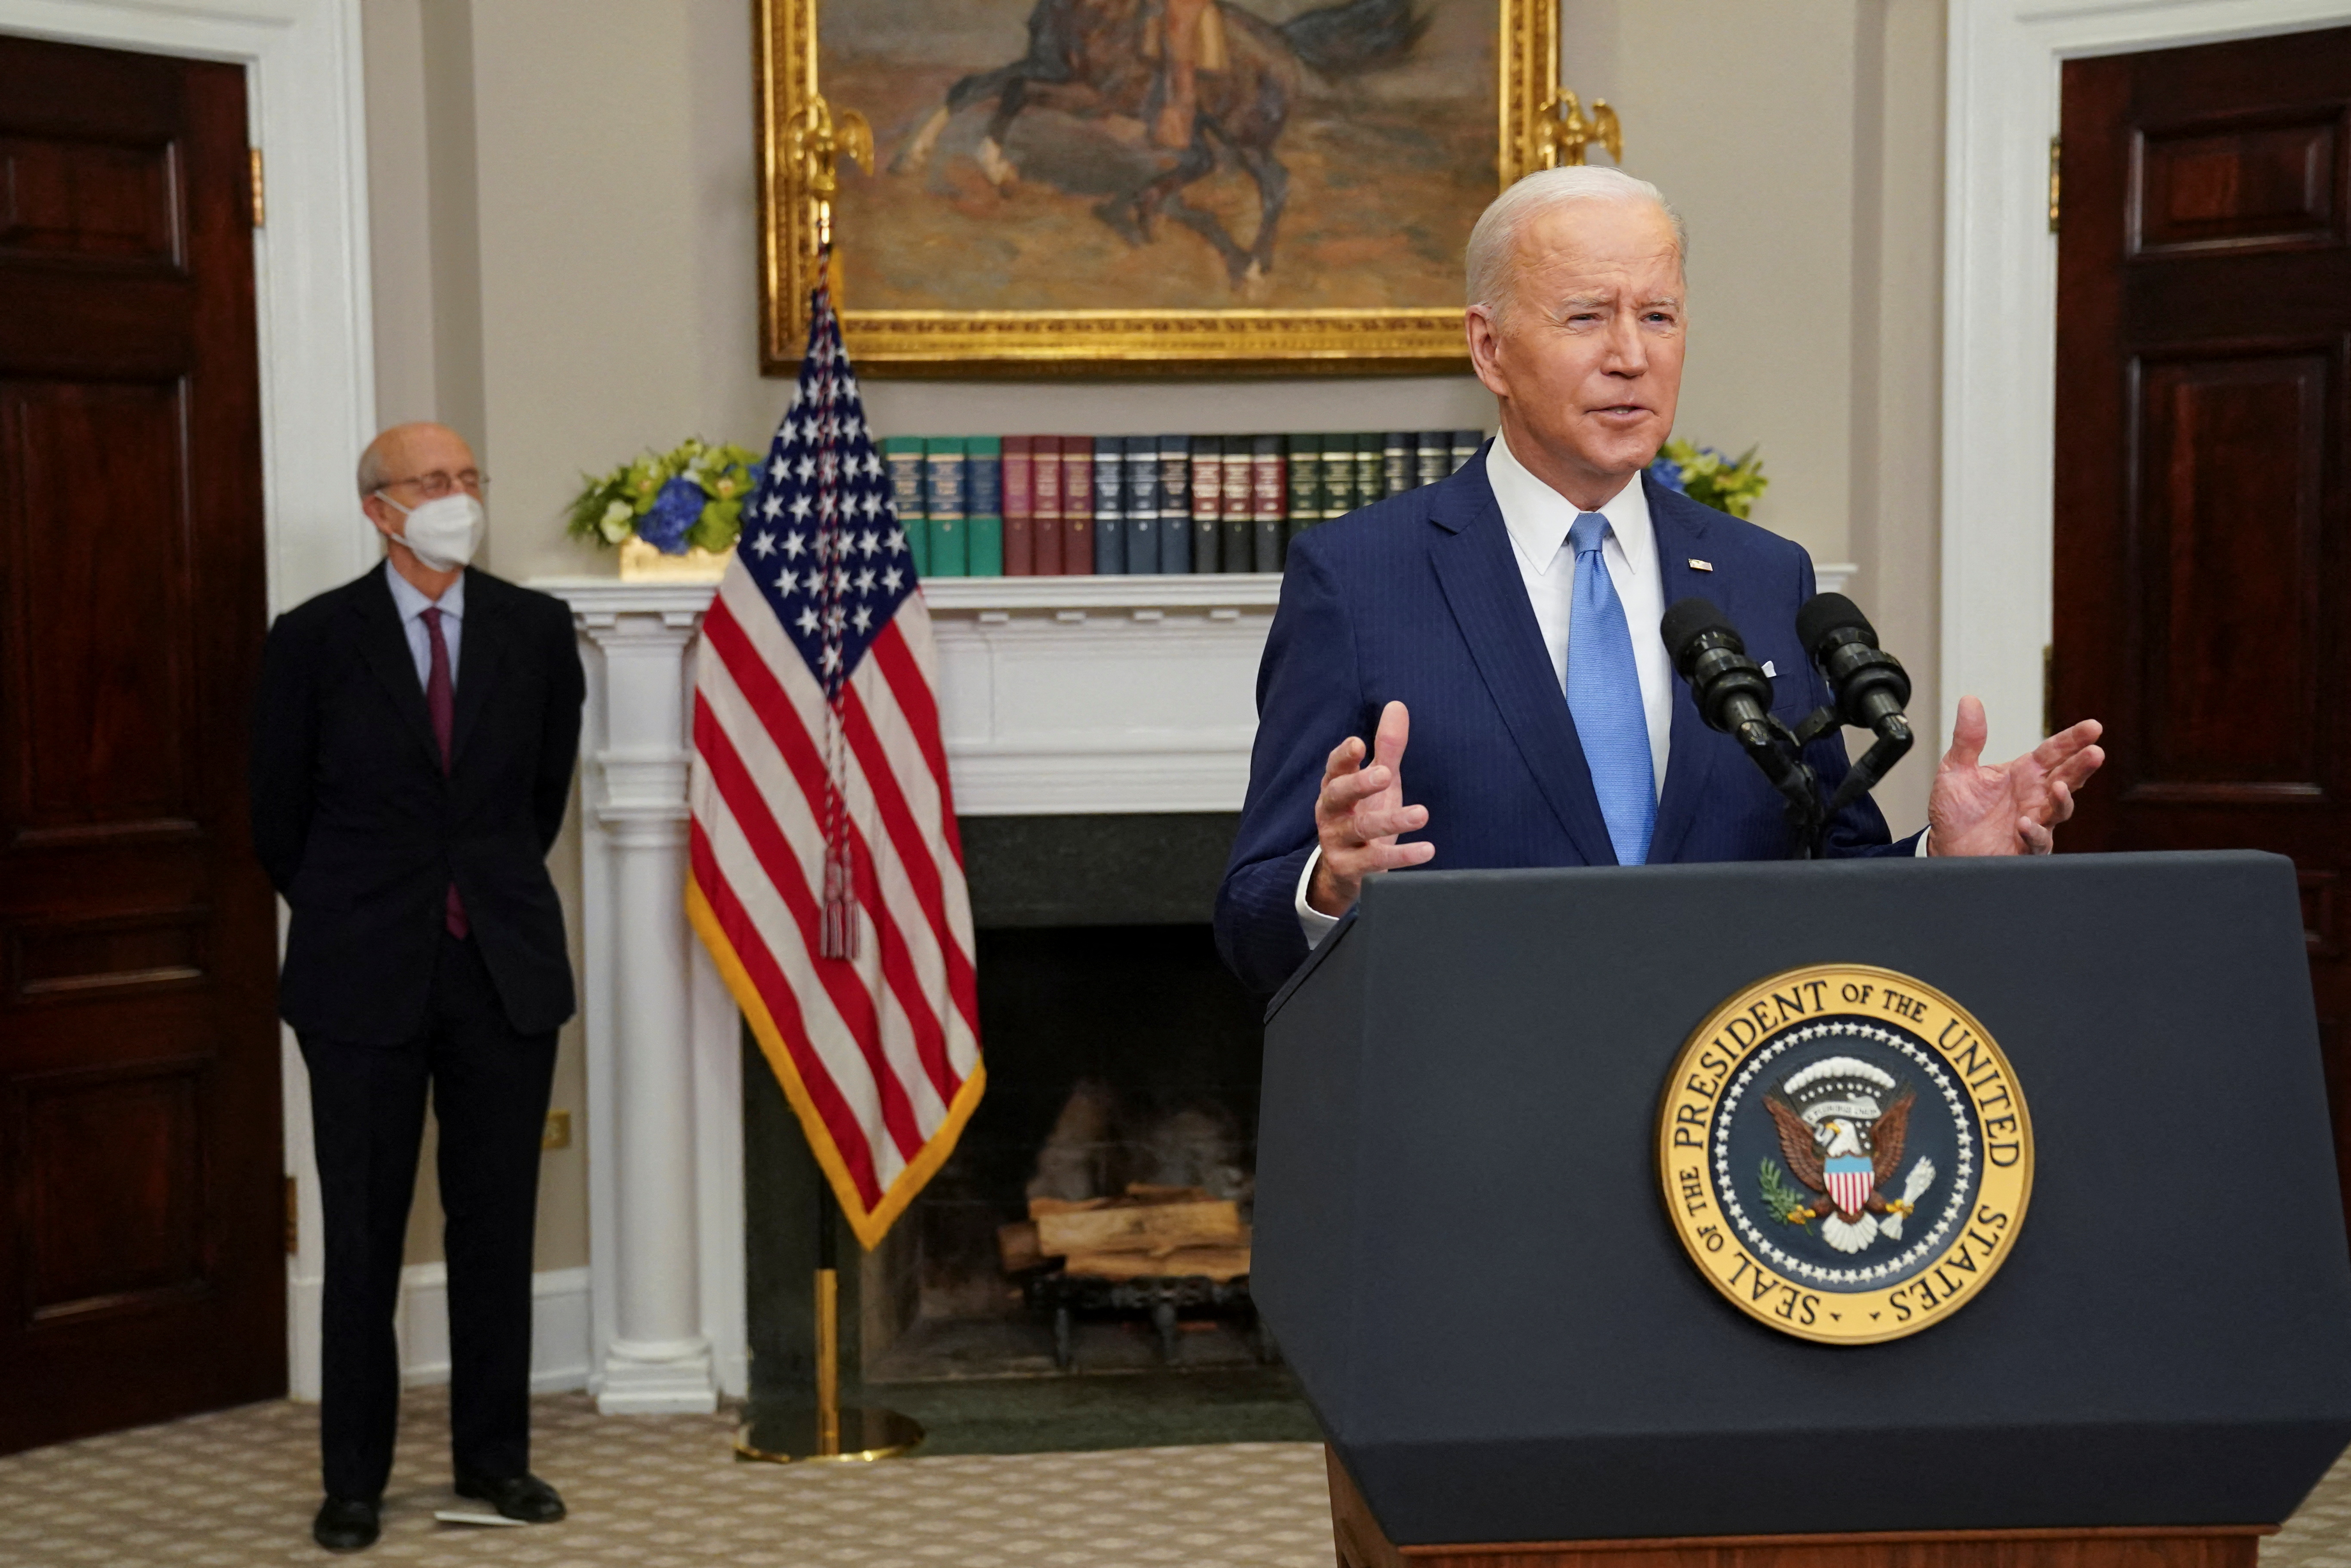 U.S. President Joe Biden delivers remarks with Supreme Court Justice Stephen Breyer as they announce Breyer will retire at the end of the court's current term, at the White House in Washington, U.S., January 27, 2022. REUTERS/Kevin Lamarque